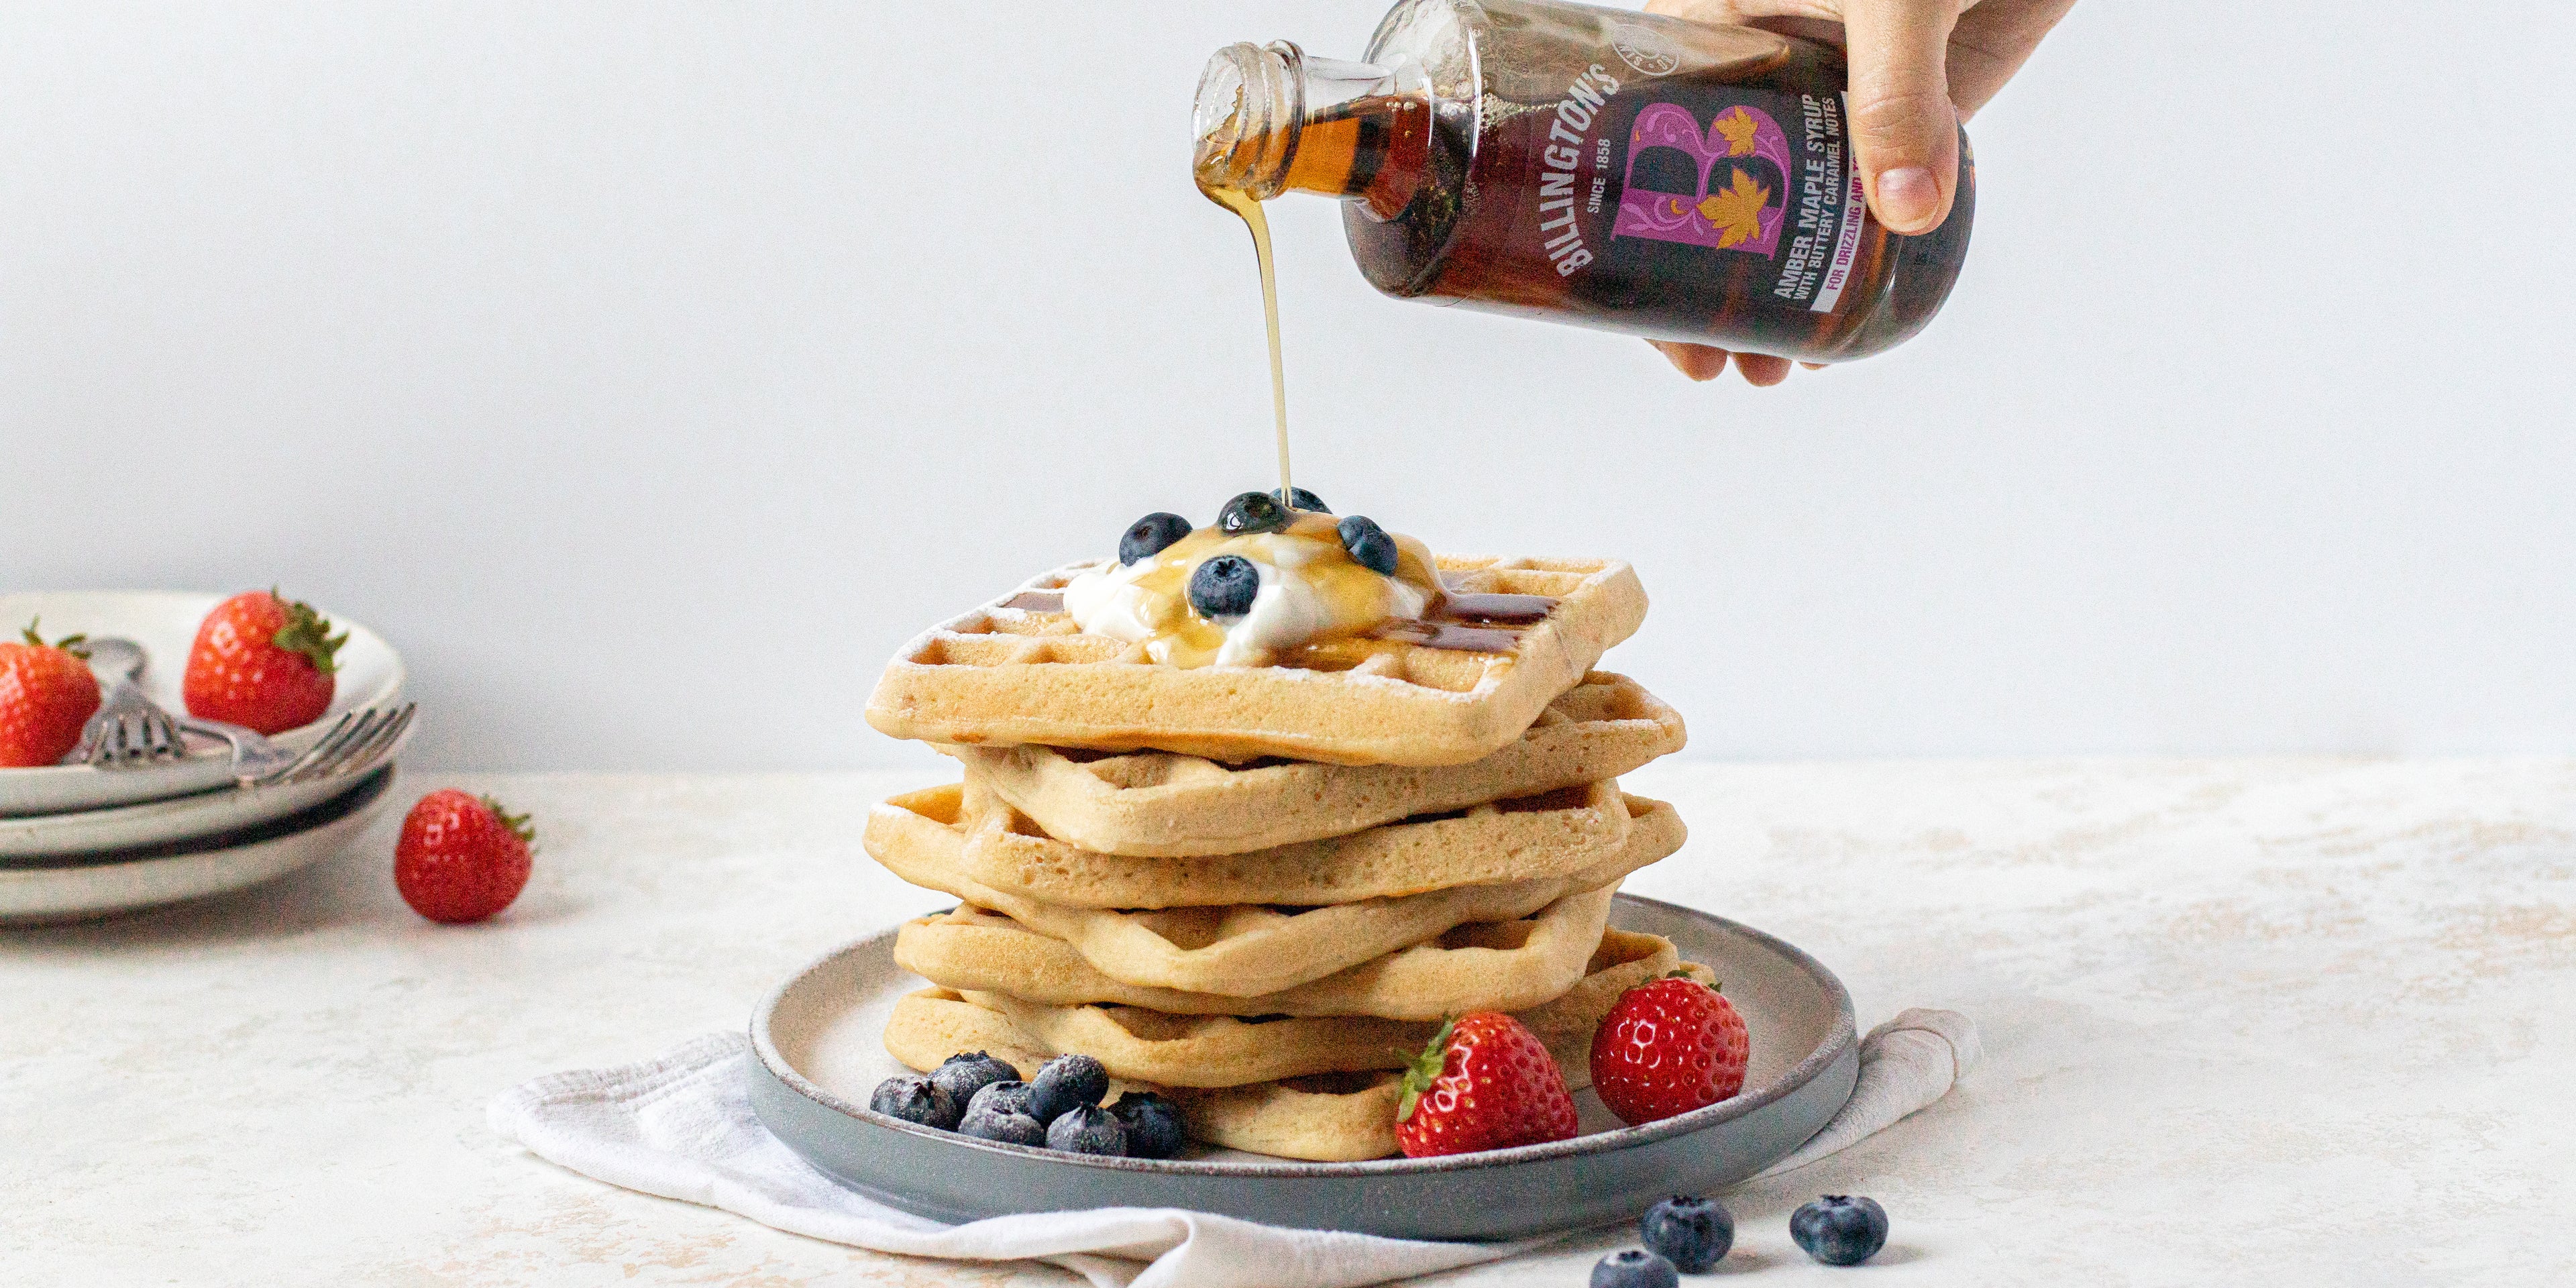 A stack of vegan gluten free waffles with a hand pour Billington's syrup over